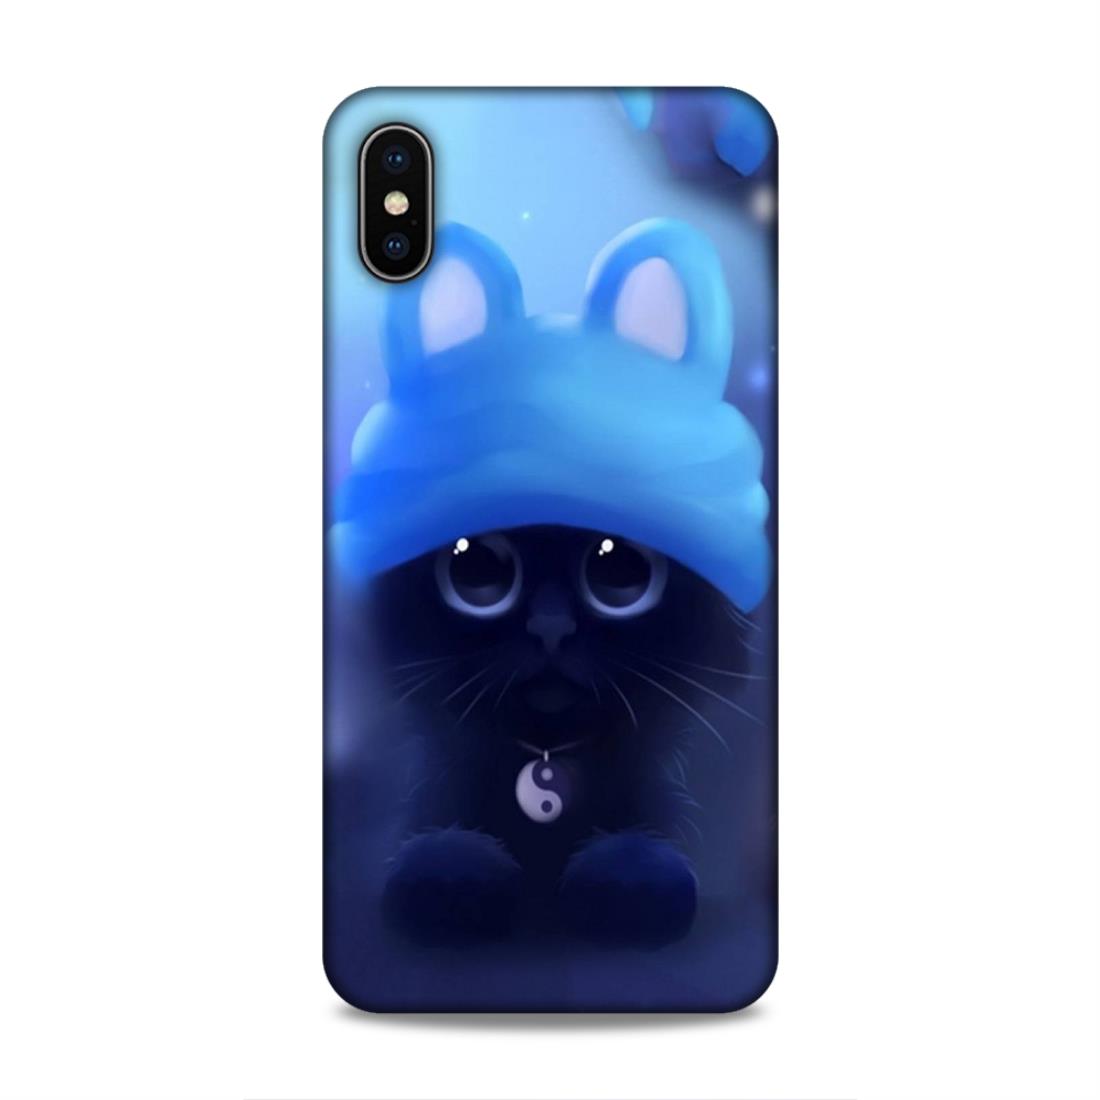 Cute Cat Hard Back Case For Apple iPhone XS Max